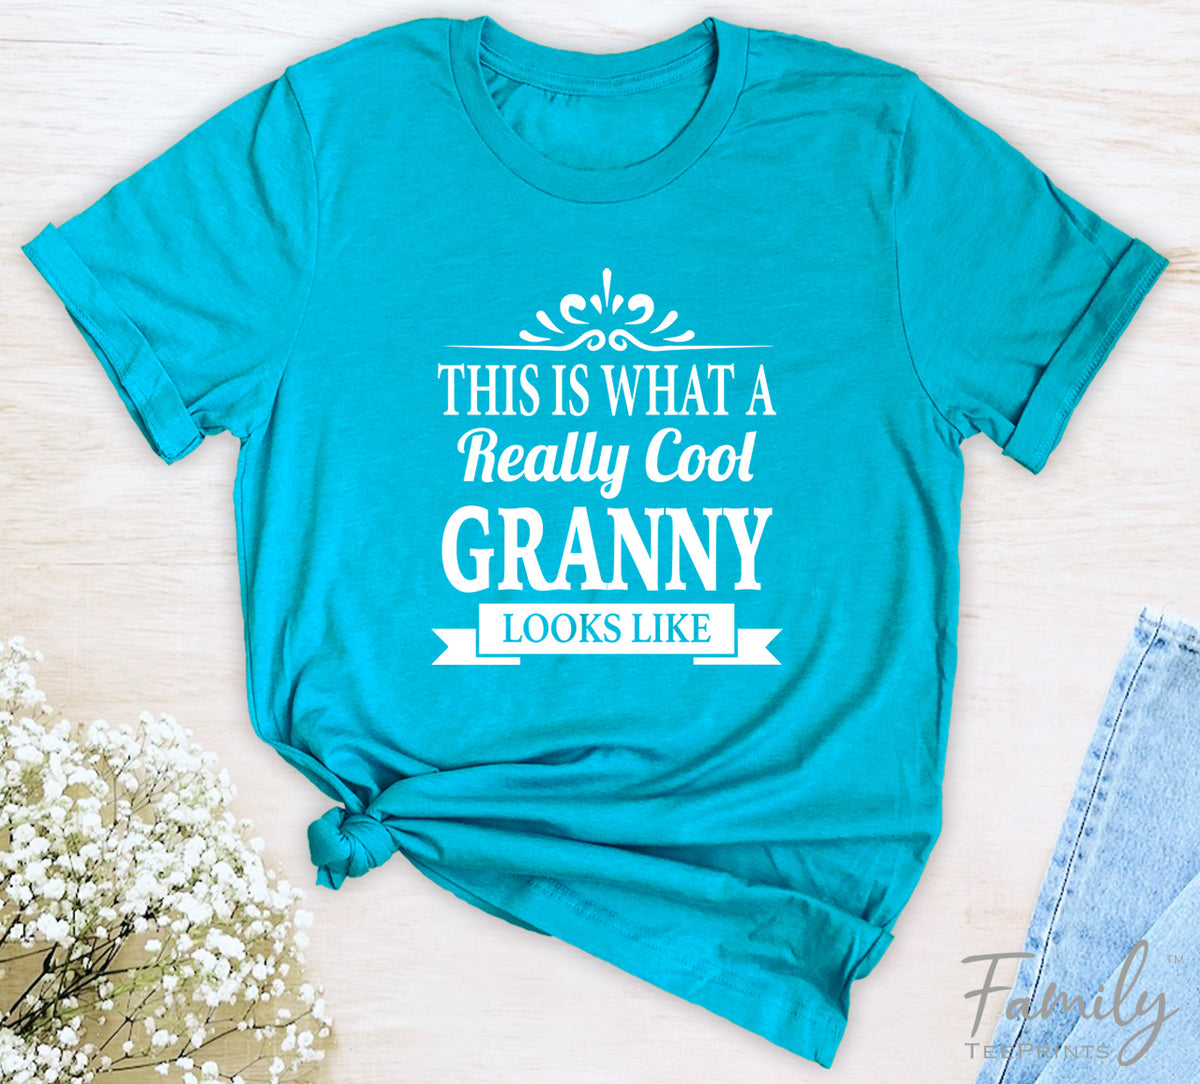 This Is What A Really Cool Granny Looks Like - Unisex T-shirt - Granny Shirt - Gift For Granny - familyteeprints